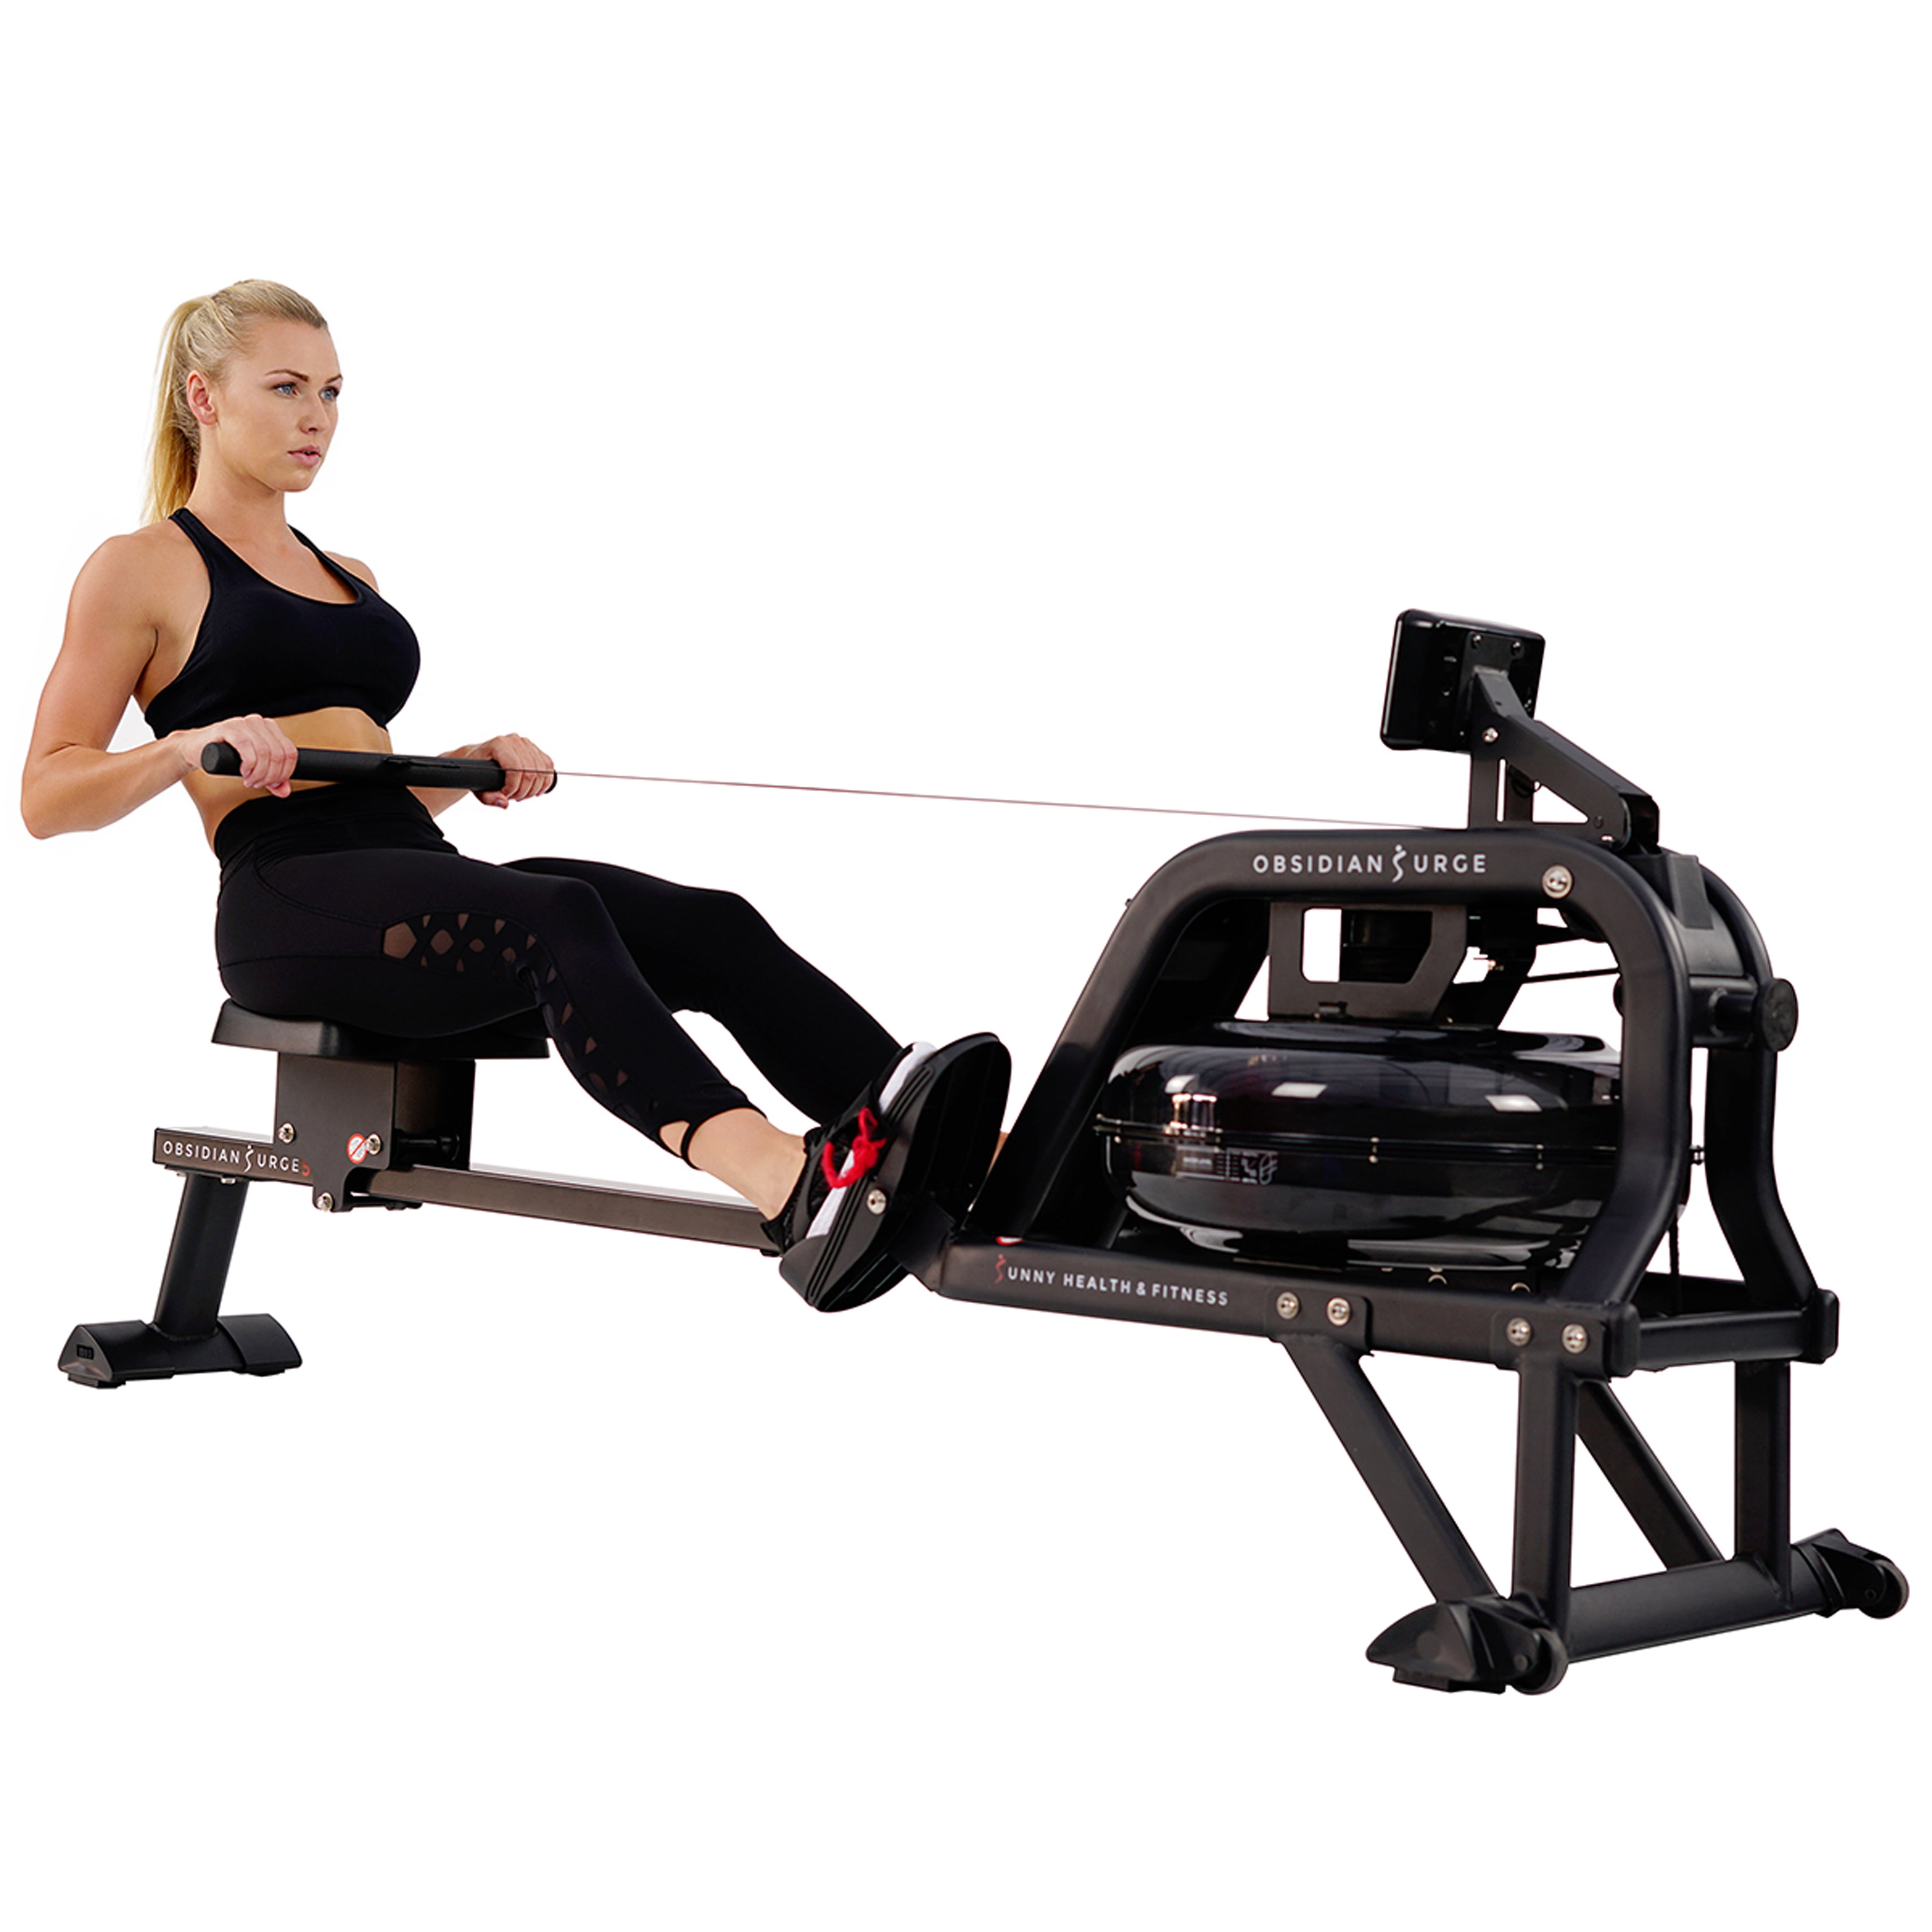 exercise rowing machine for home